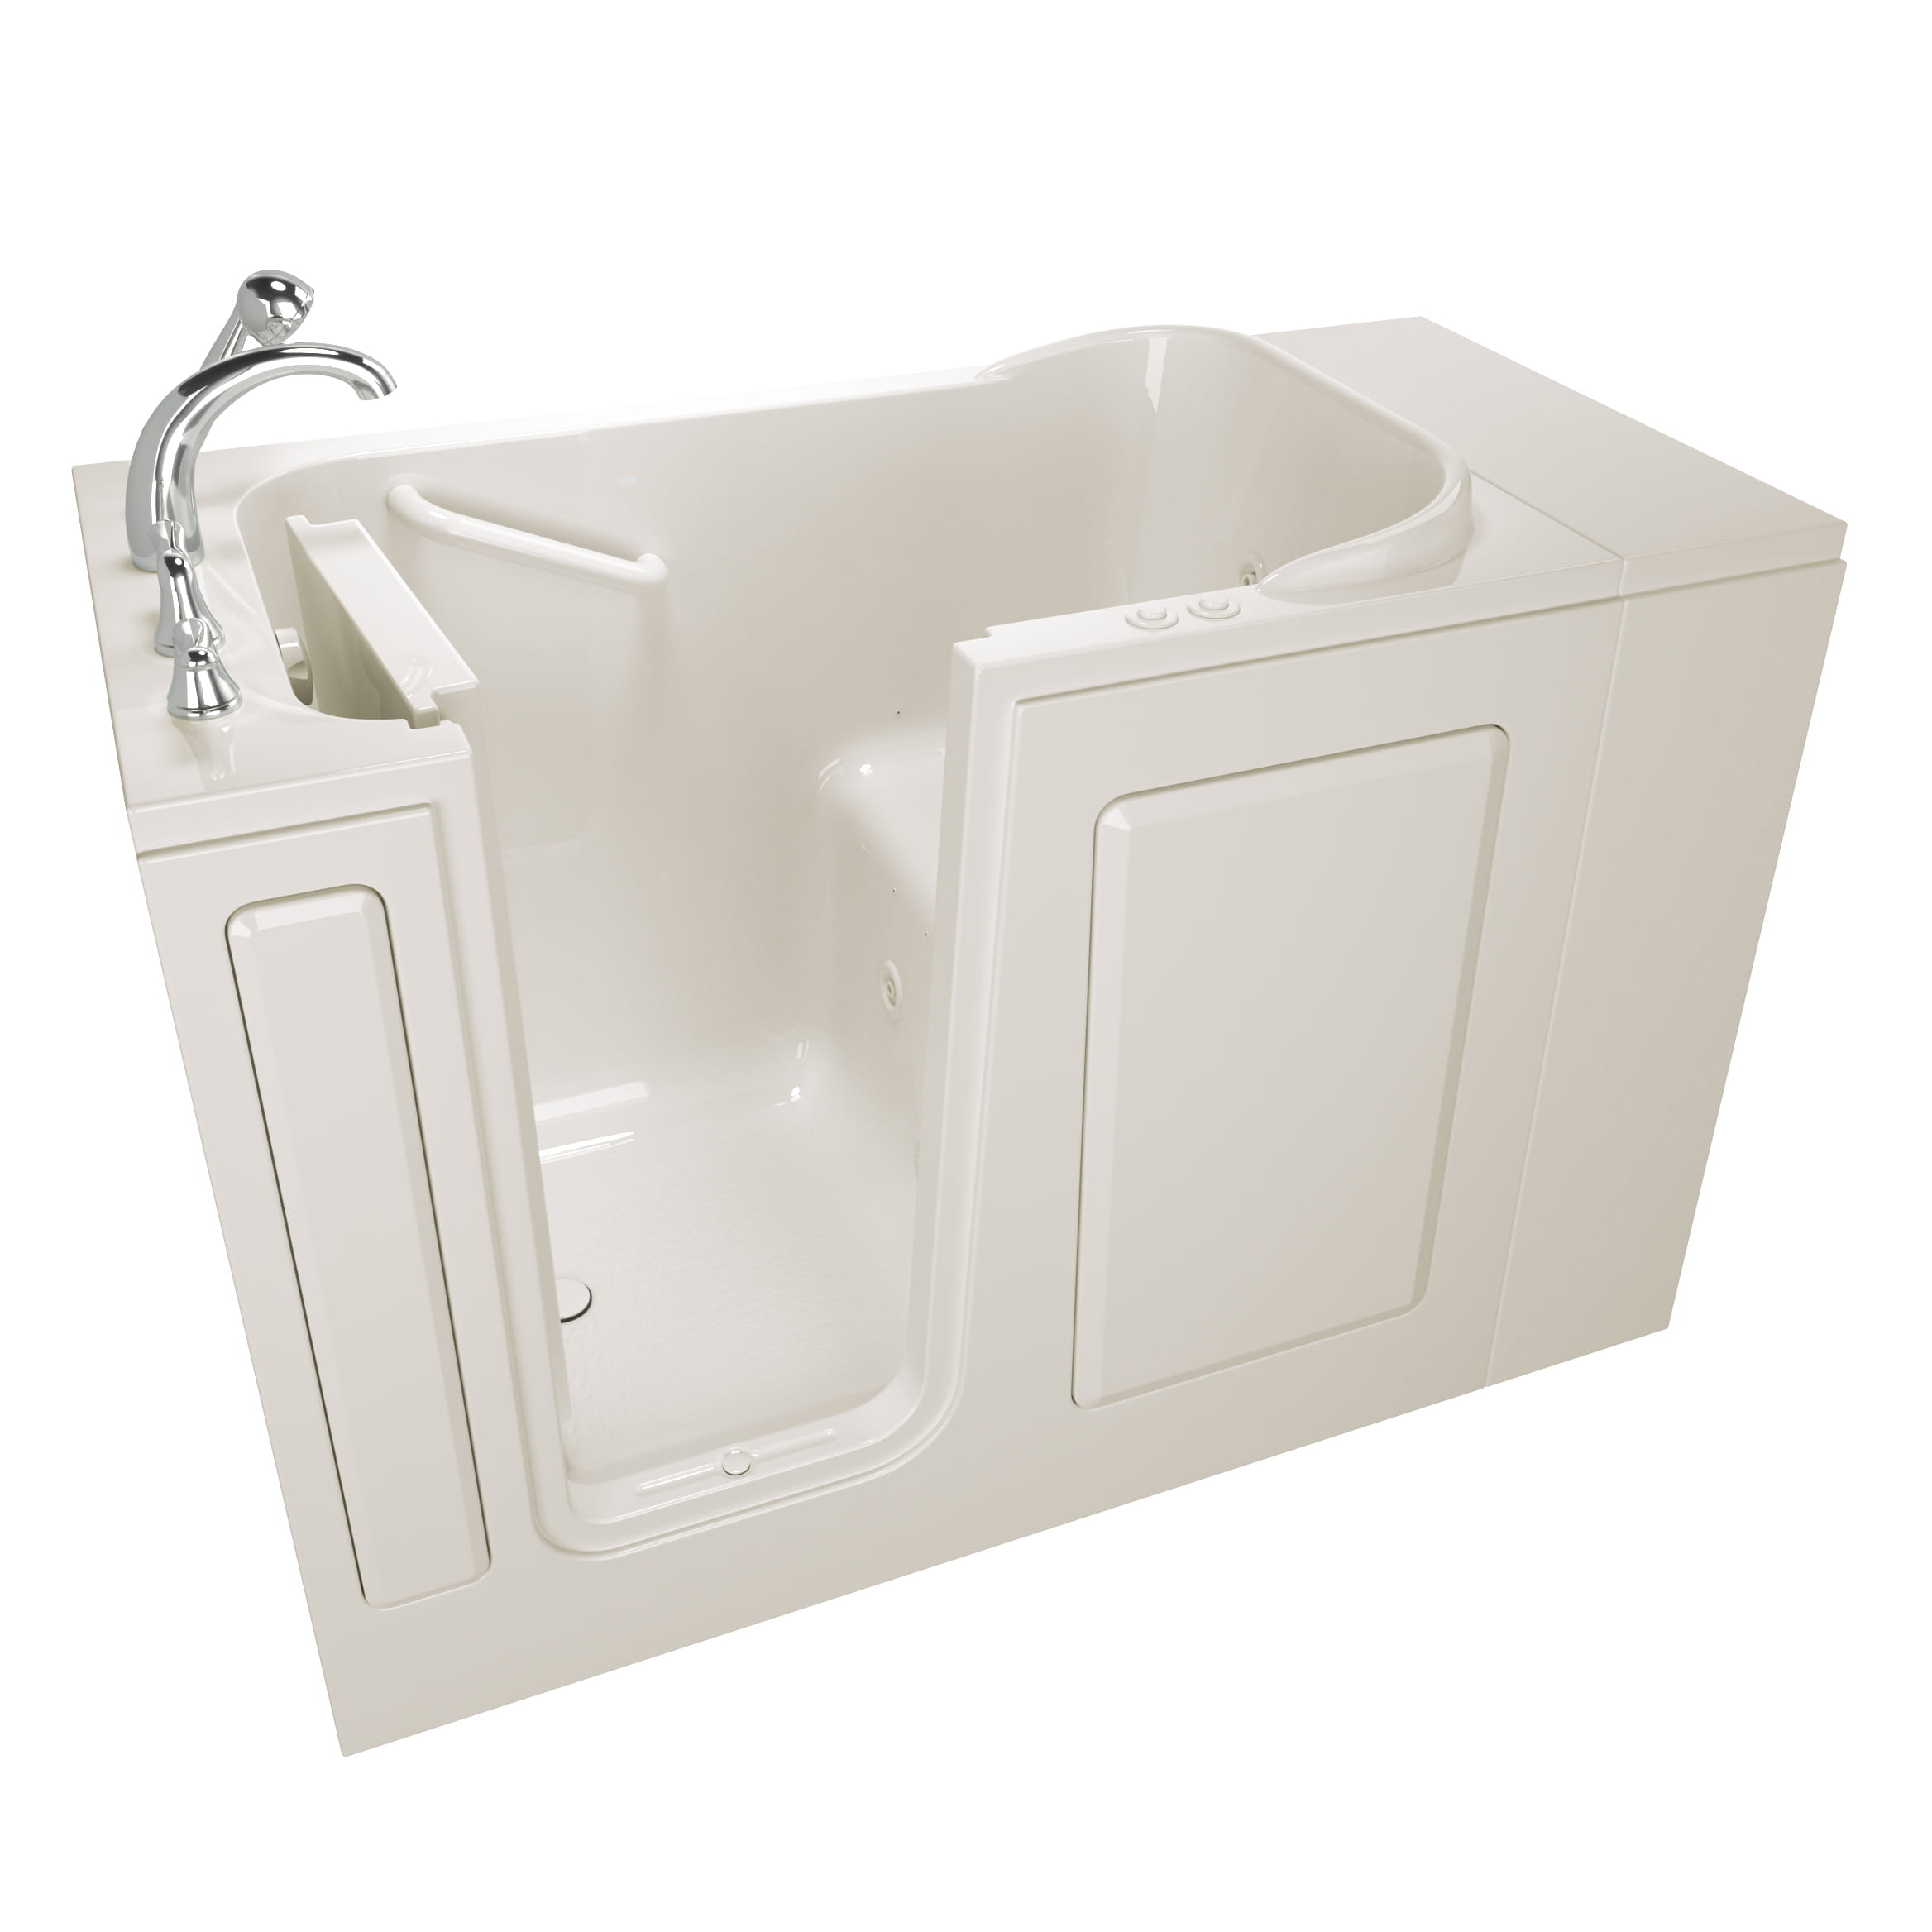 Gelcoat Entry Series 48 x 28-Inch Walk-In Tub With Combination Air Spa and Whirlpool Systems – Left-Hand Drain With Faucet